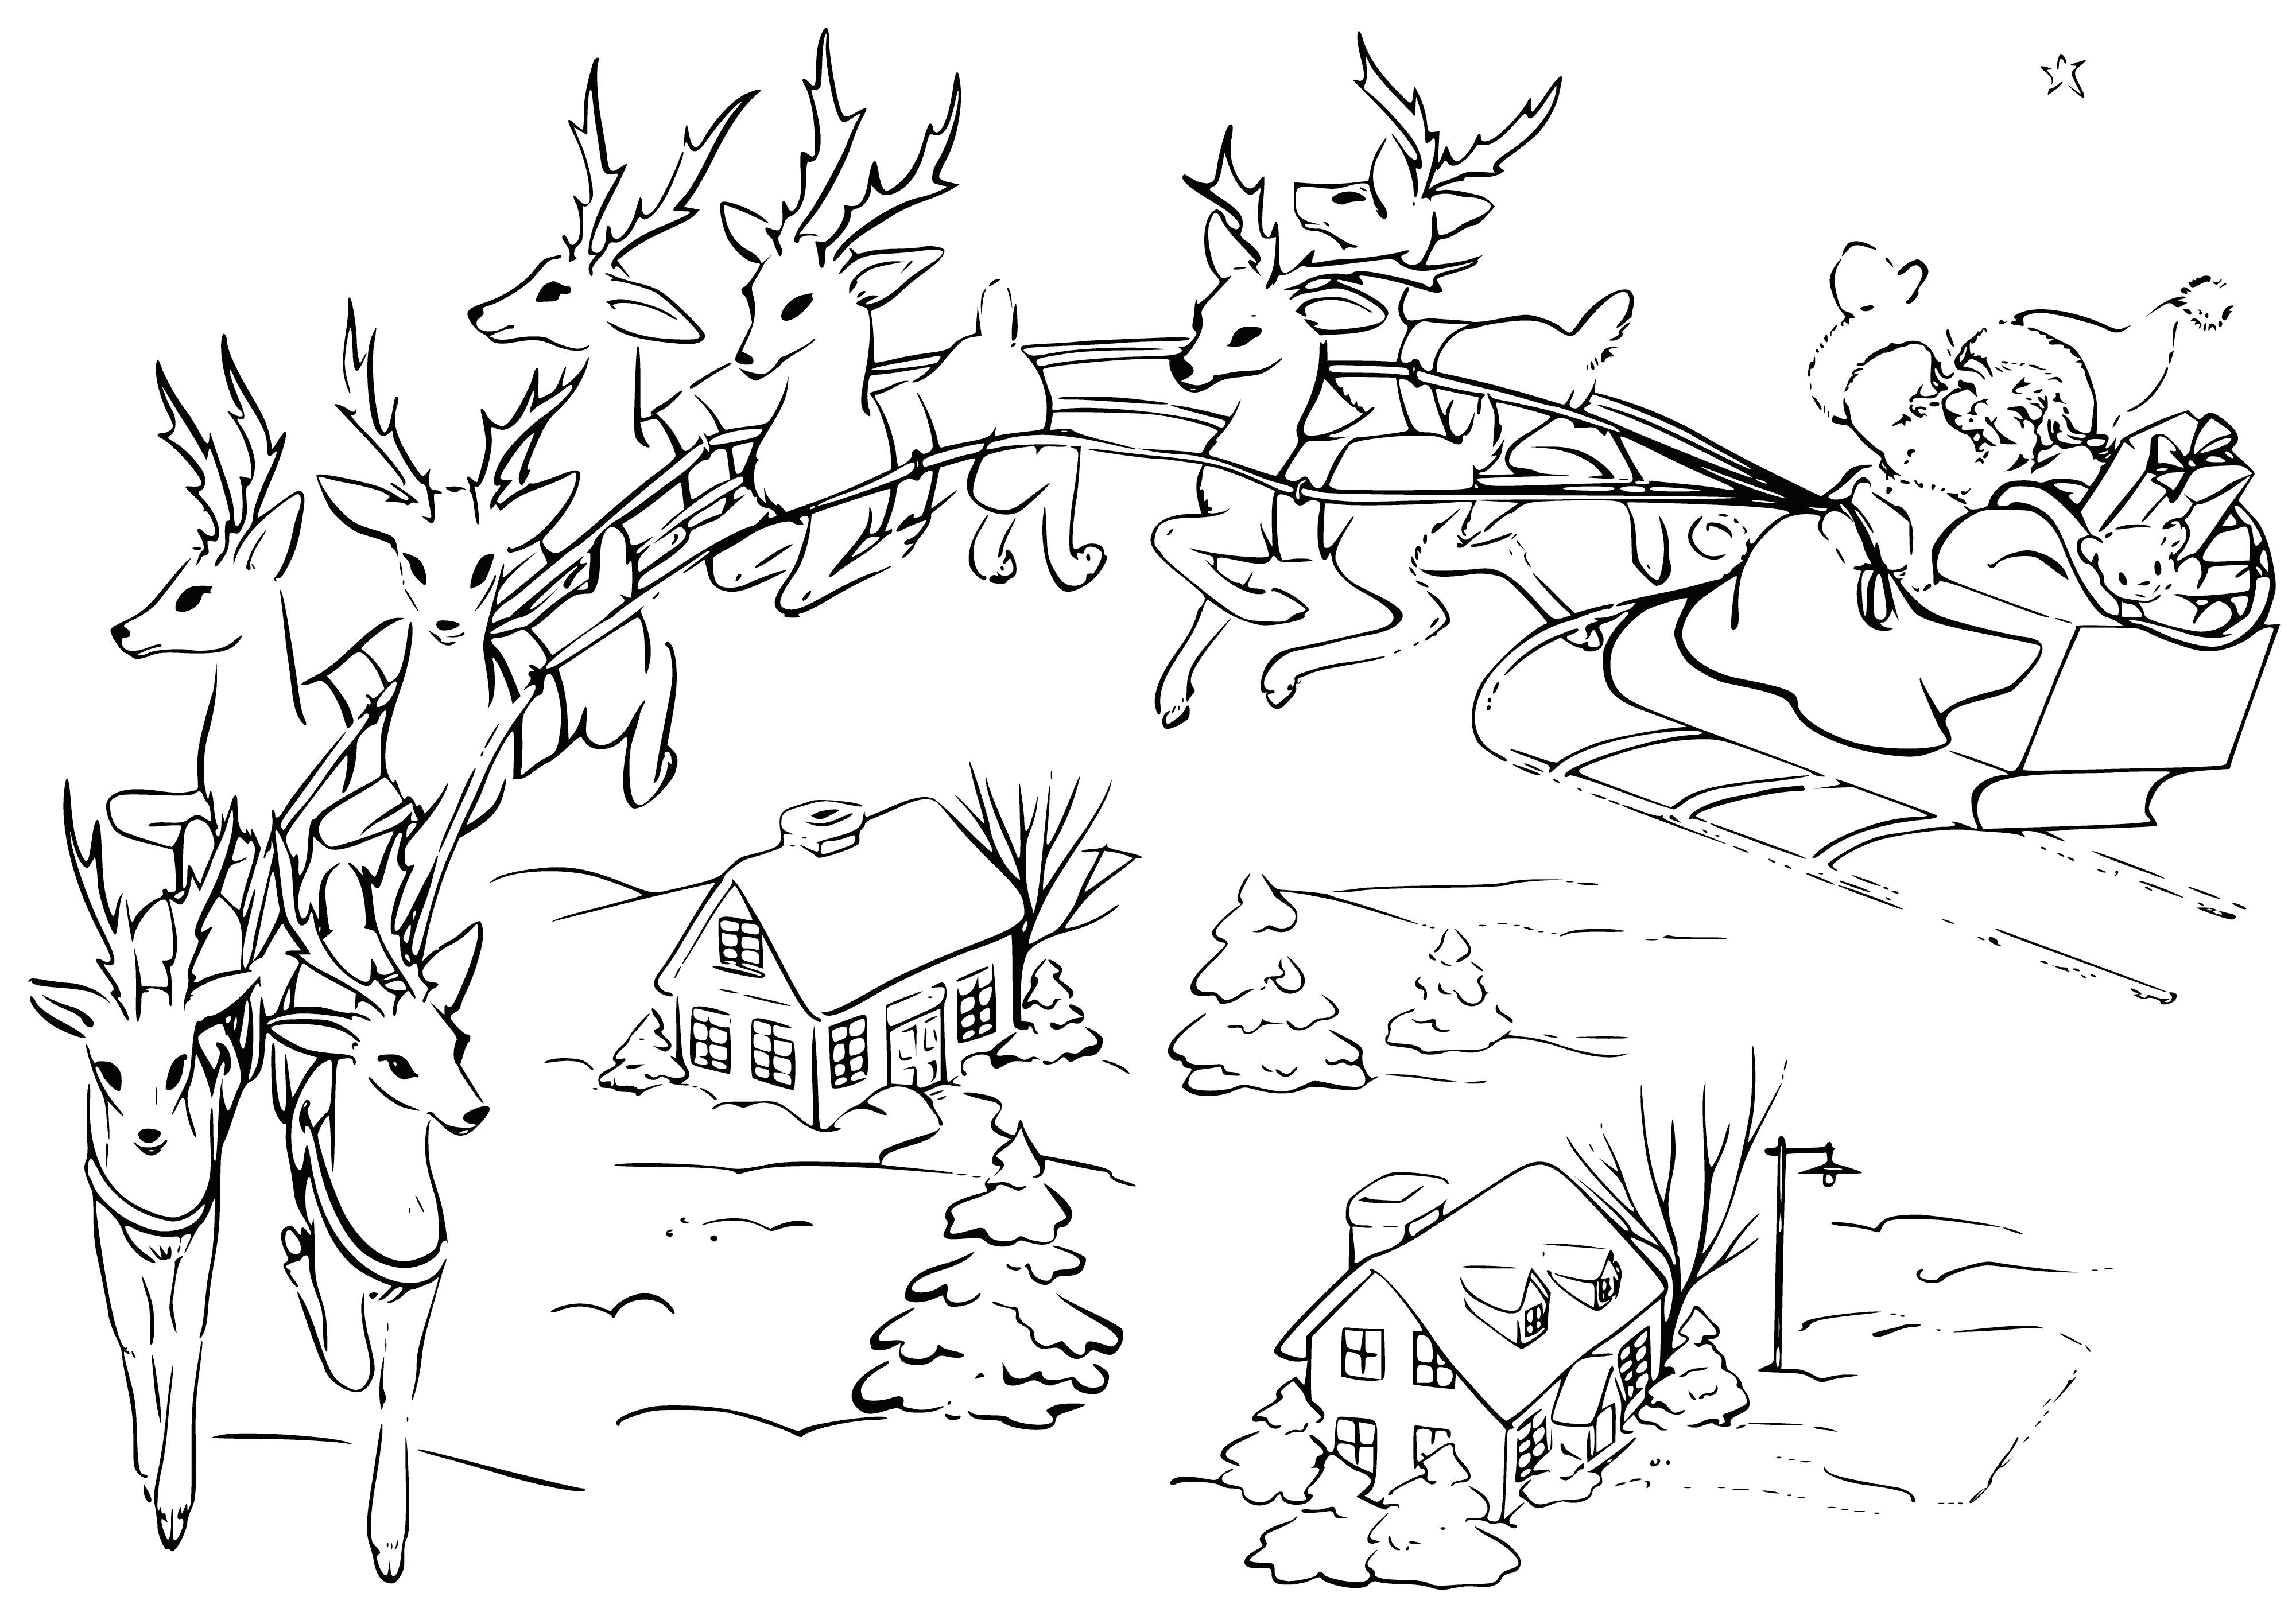 coloring page: Santa brings joy to the world on Christmas night, delivering presents to happy children with a sack full of toys and goodies.